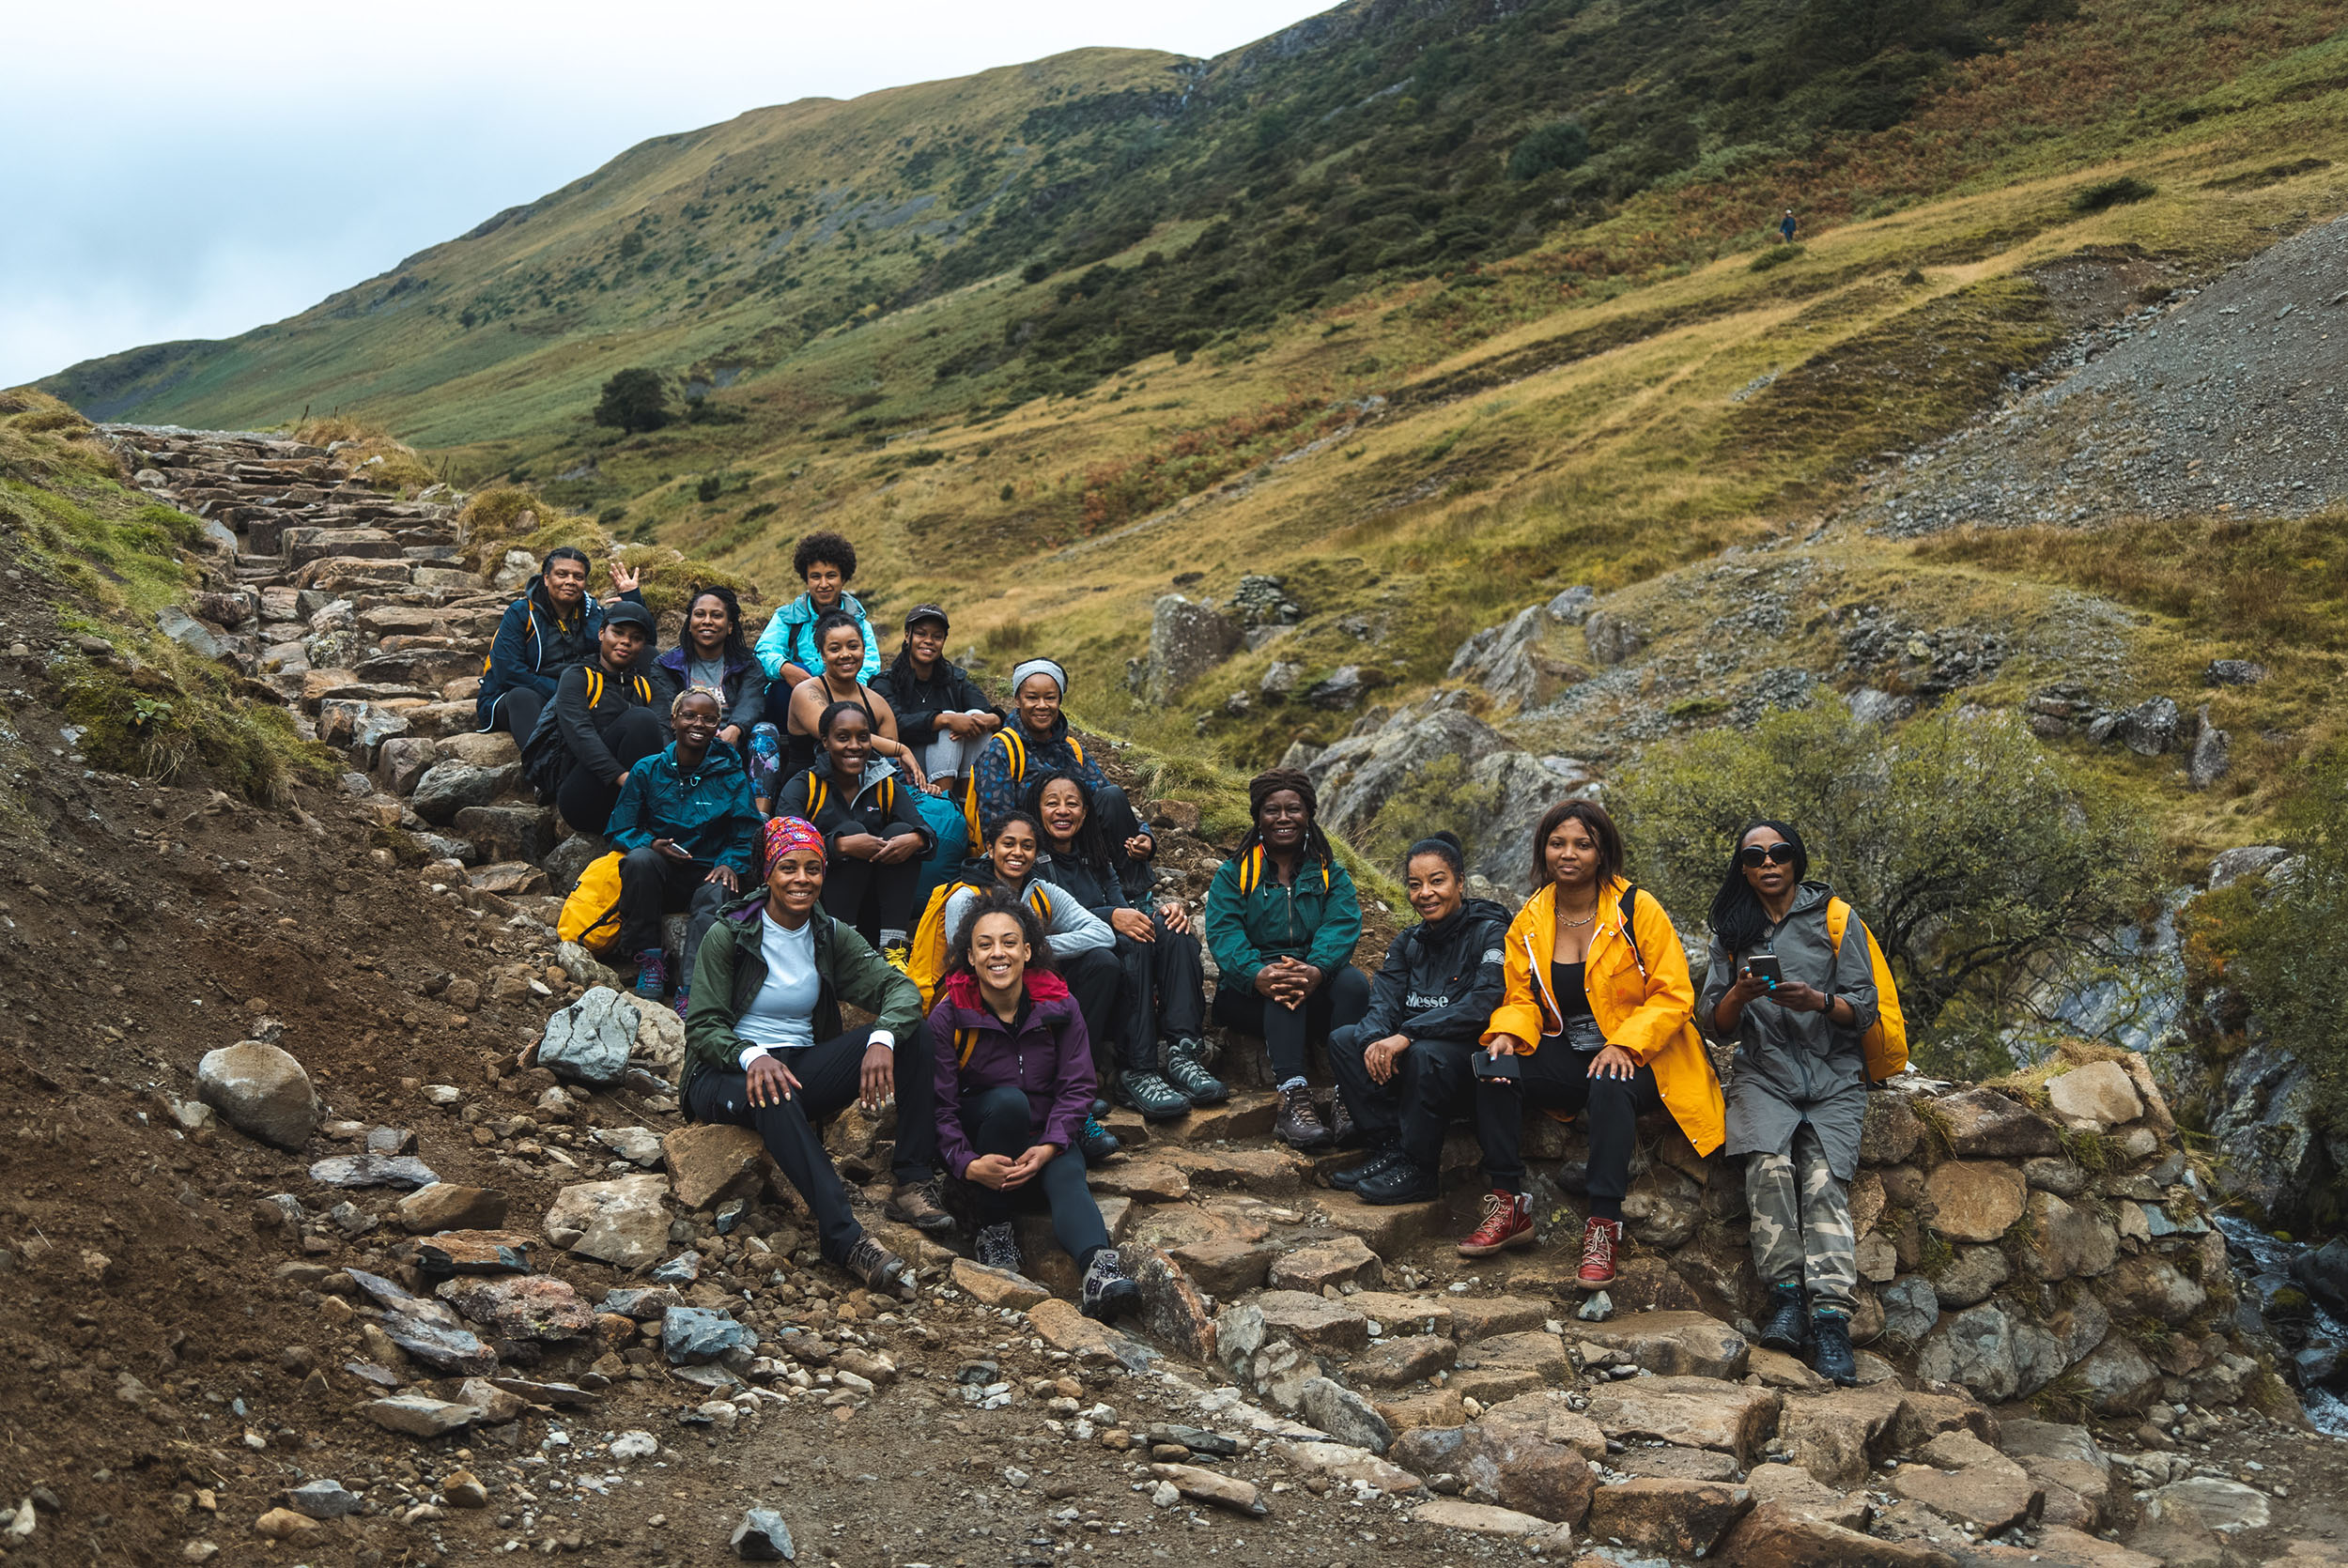 A group of around 20 Black and brown people in hiking gear smile for a photo on a rocky hillside.